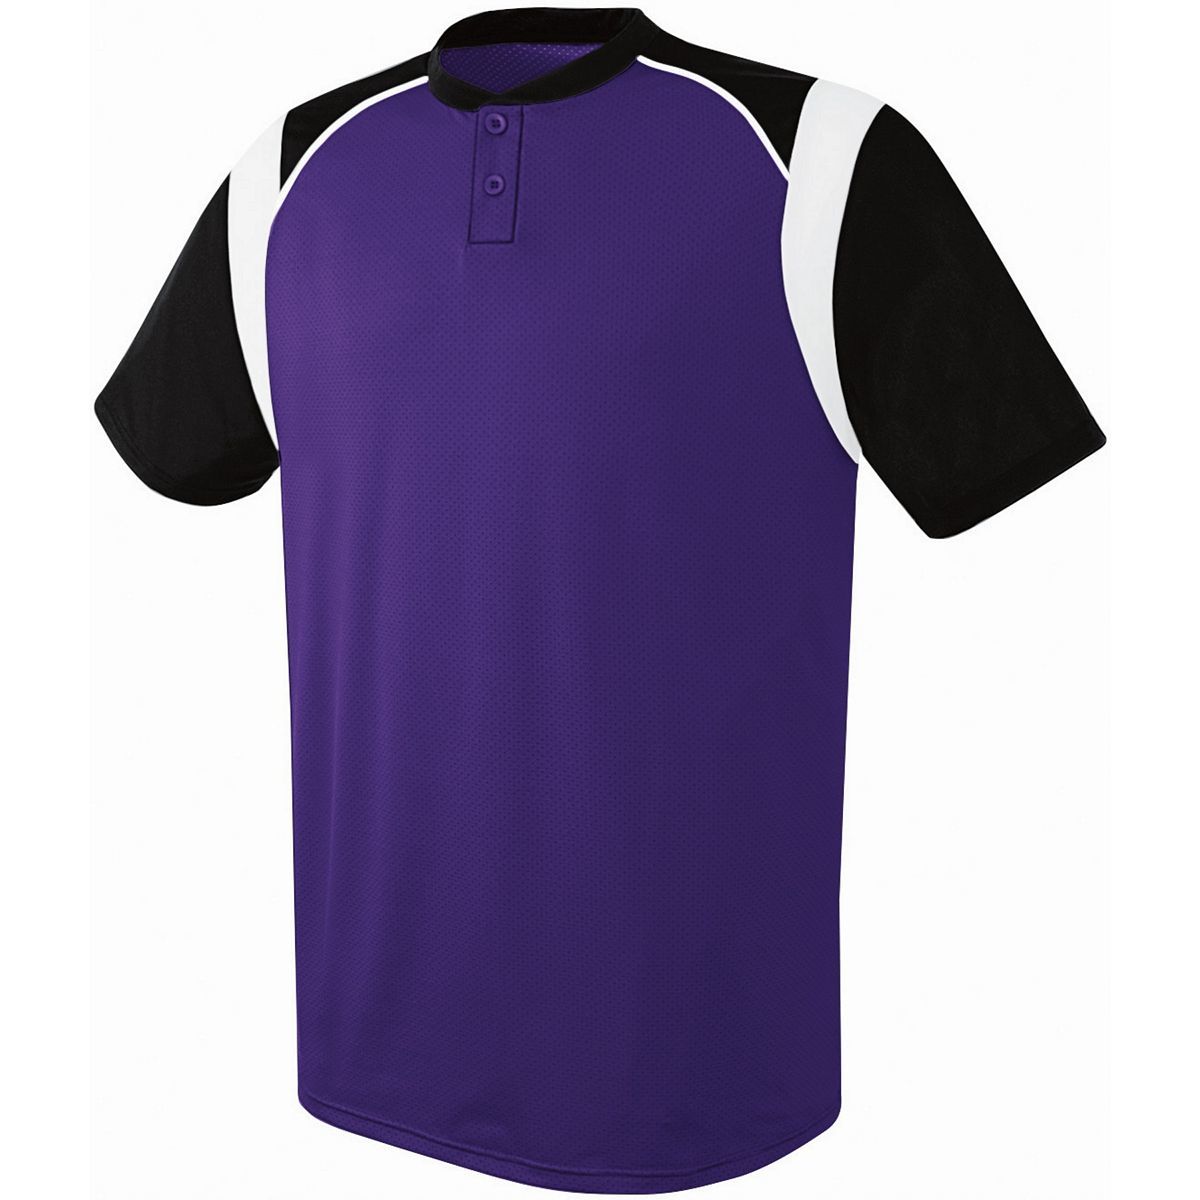 Augusta Sportswear Youth Wildcard Two-Button Jersey in Purple/Black/White  -Part of the Youth, Youth-Jersey, Augusta-Products, Baseball, Shirts, All-Sports, All-Sports-1 product lines at KanaleyCreations.com